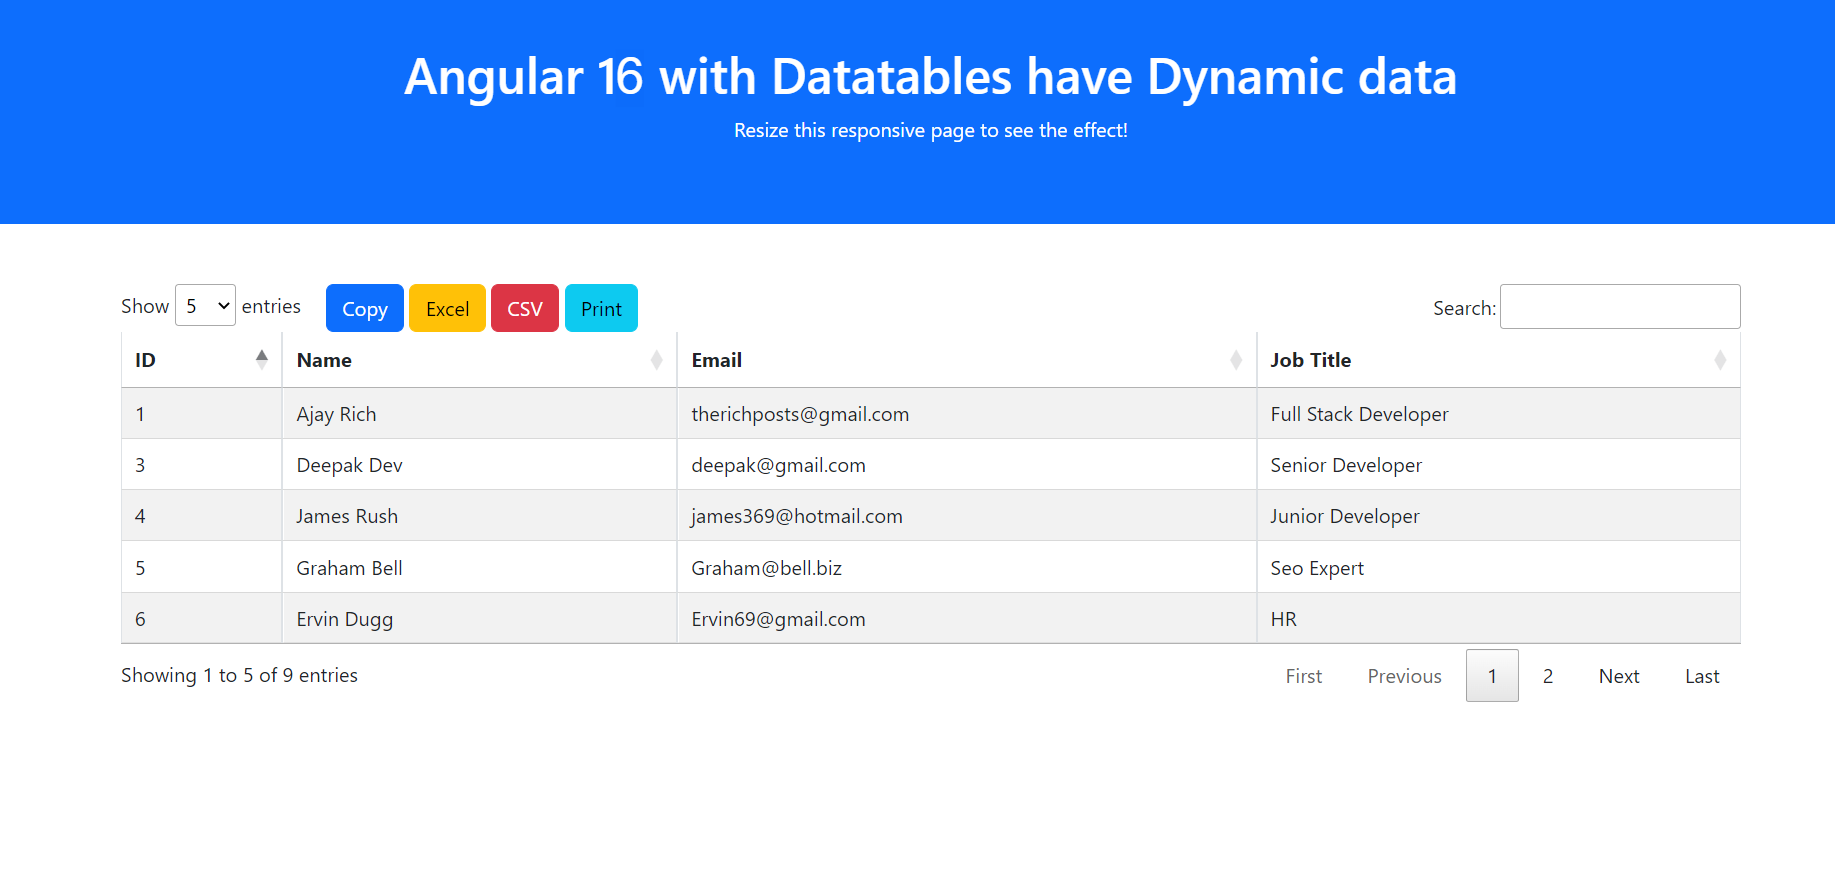 Angular 16 Datatable with Print CSV Excel Copy Buttons